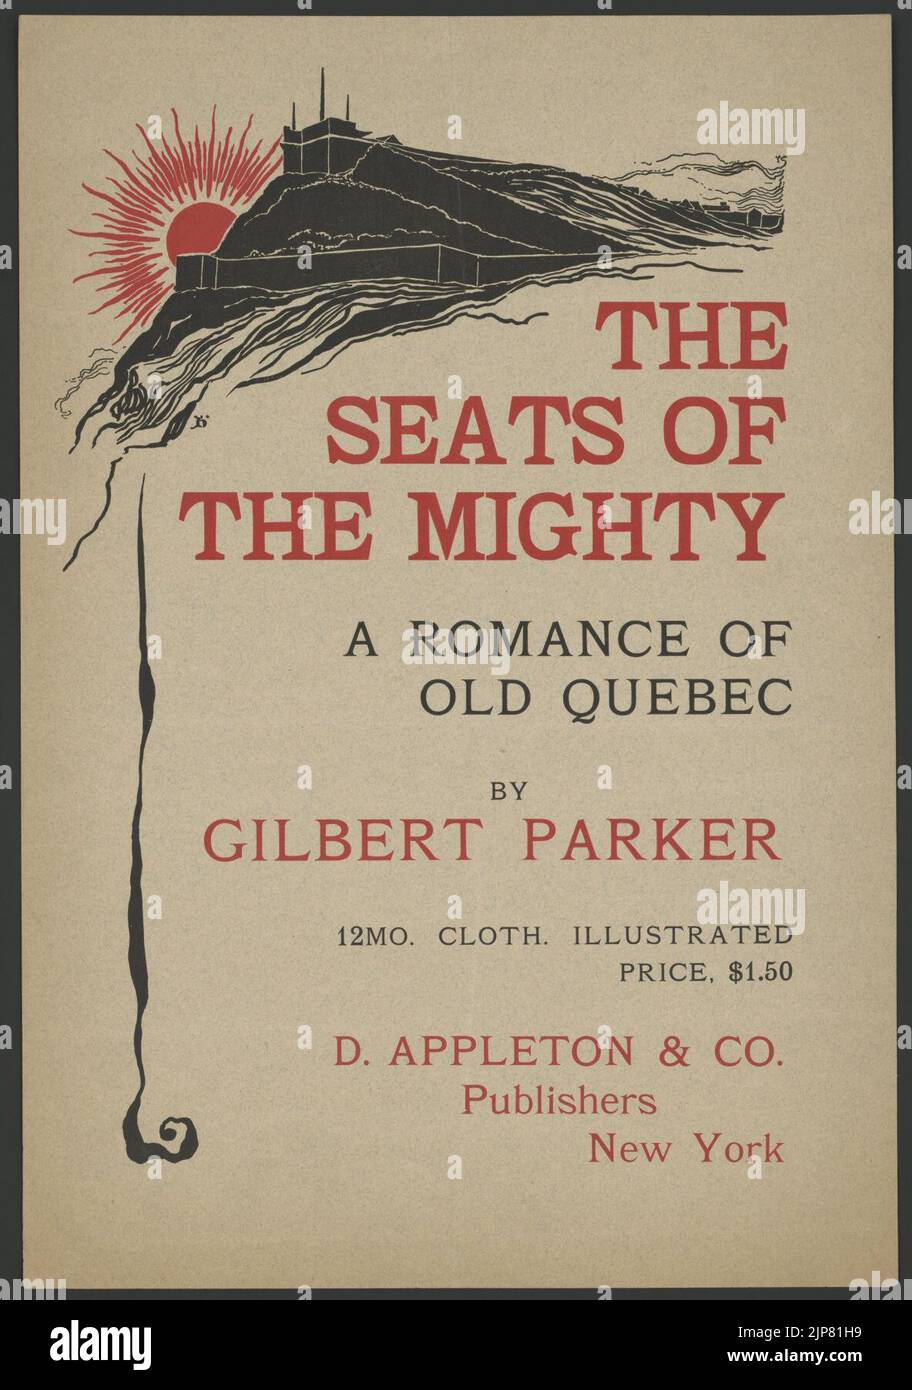 The seats of the mighty, a romance of old Quebec by Gilbert Parker ... D. Appleton & Co., publishers, New York - H. Stock Photo